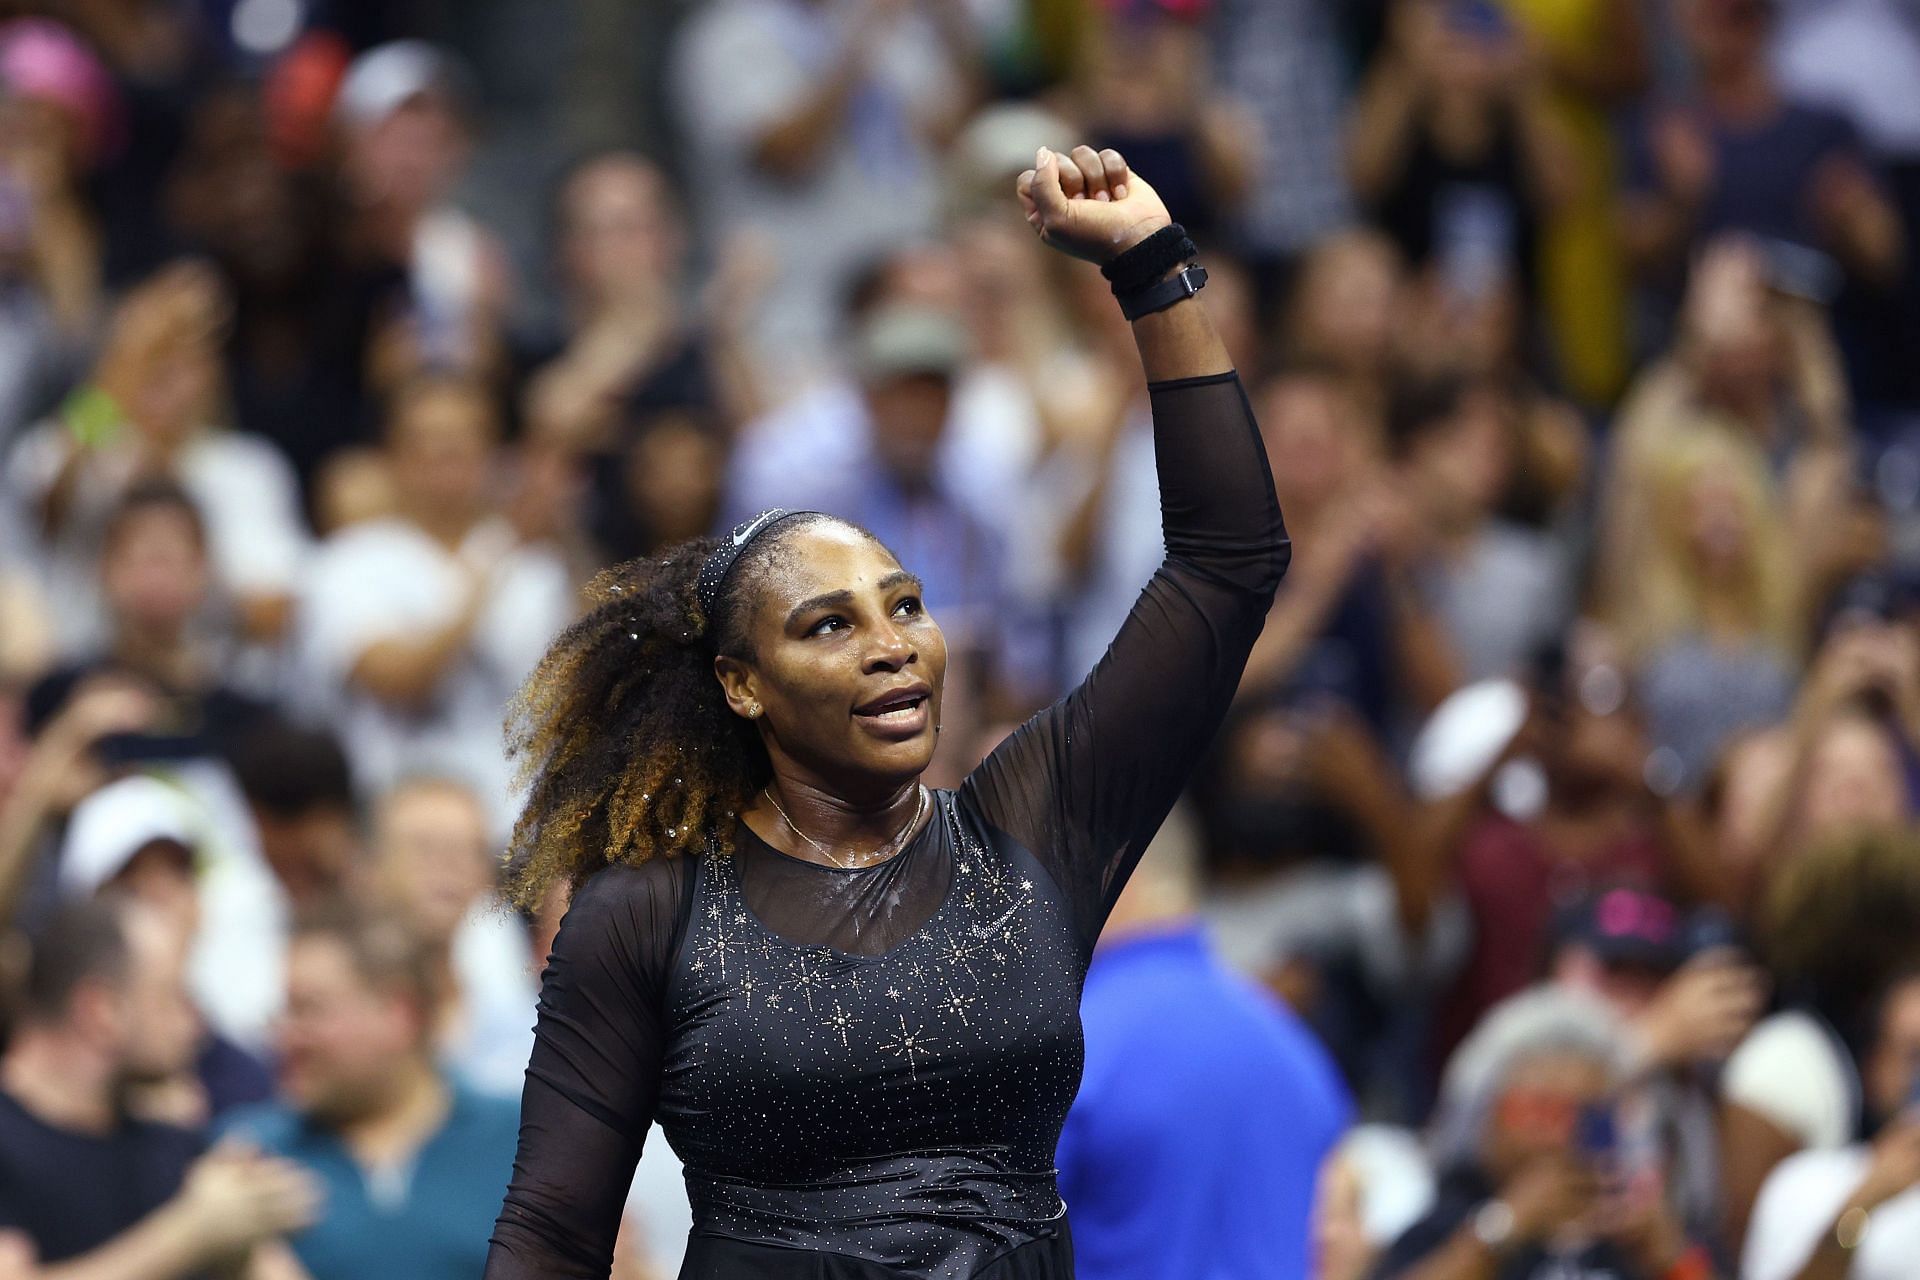 Serena Williams' first-round match at US Open 2022 averages 2.7 Million